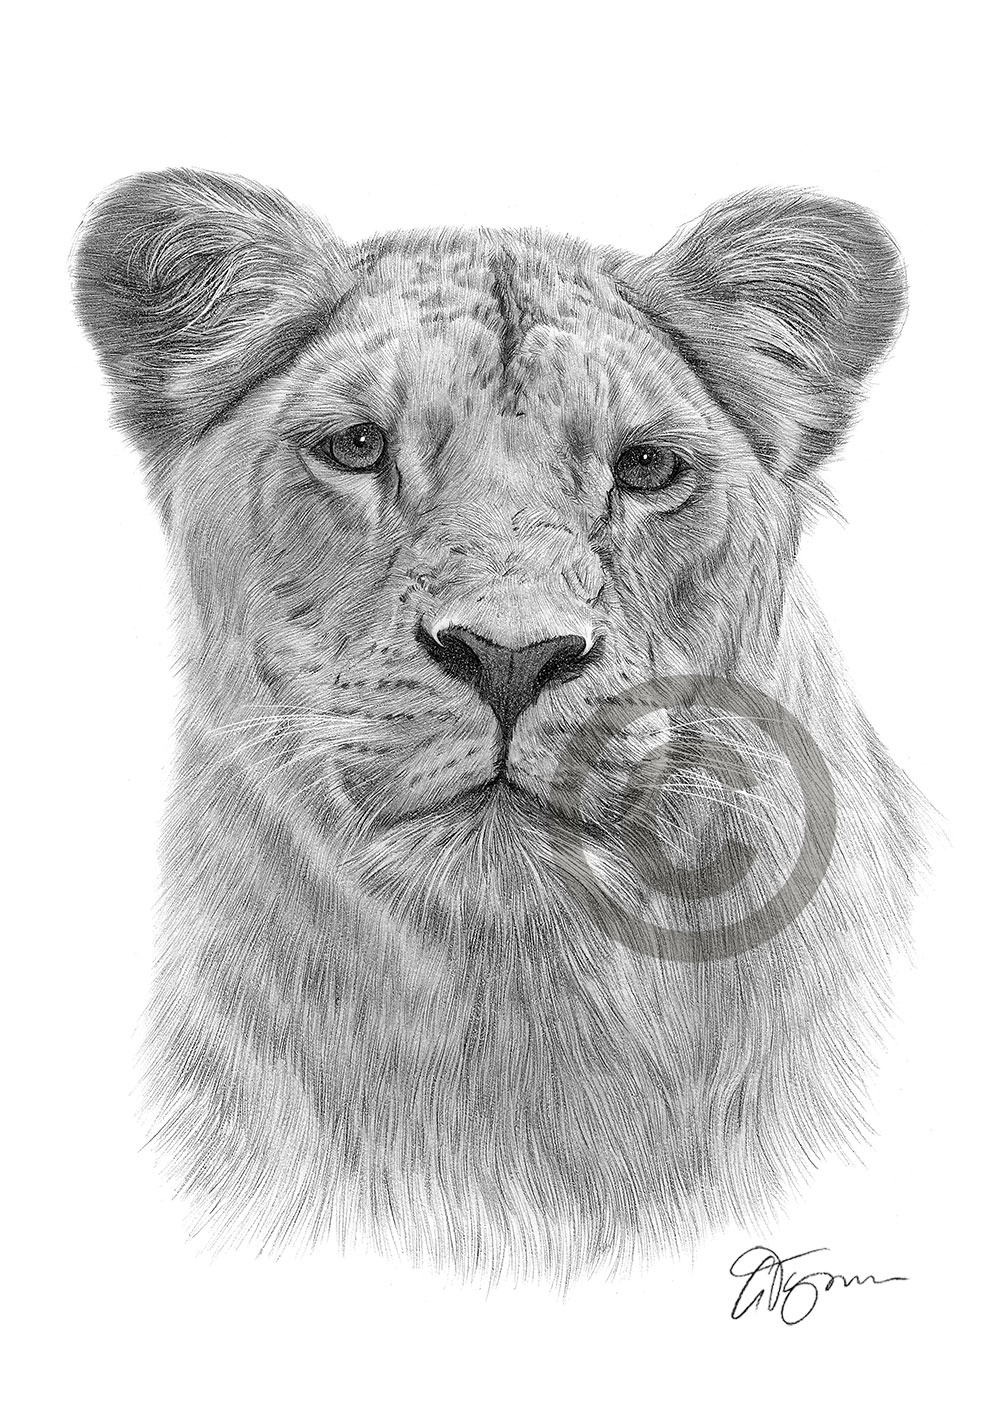 Pencil drawing of a lioness by artist Gary Tymon